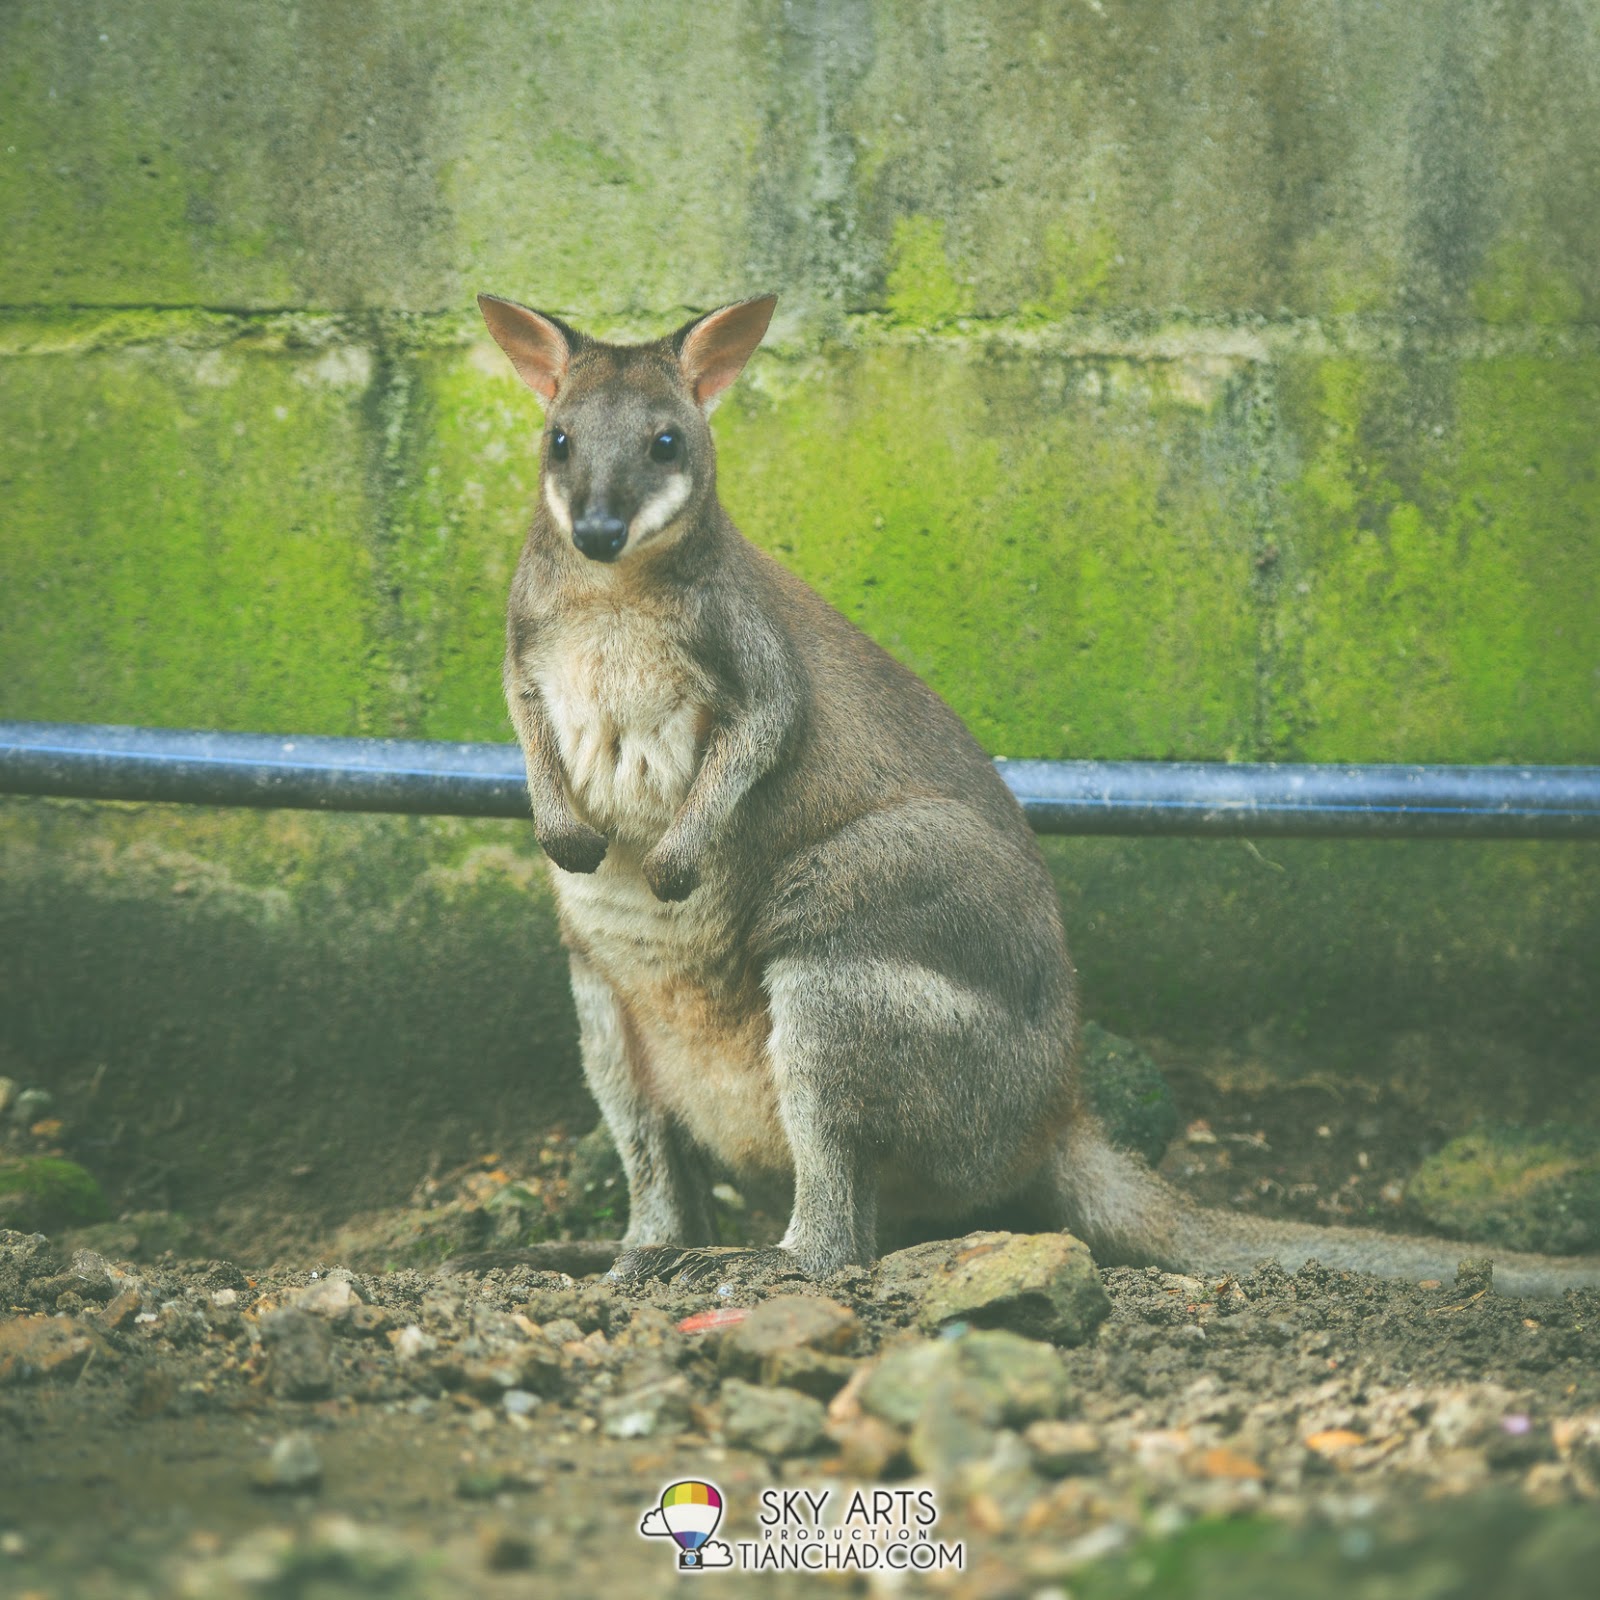 Wallaby - a very small size kangaroo that originated from Australia